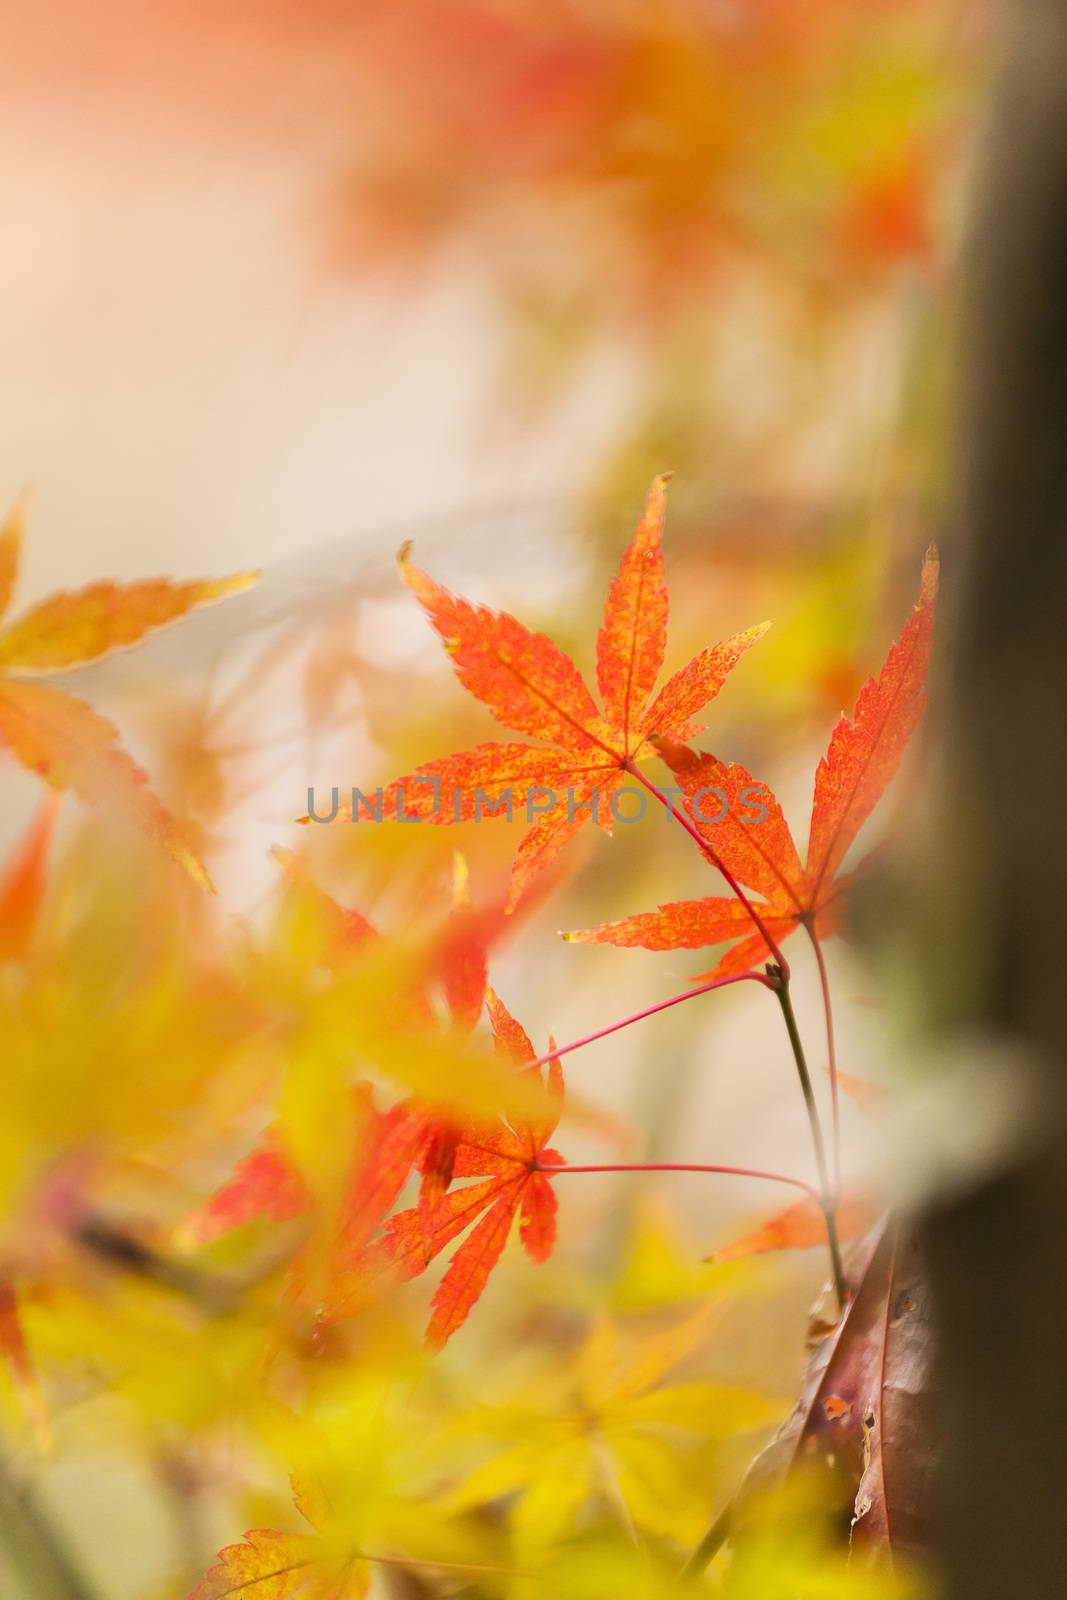 Red leaves in autumn at Japan